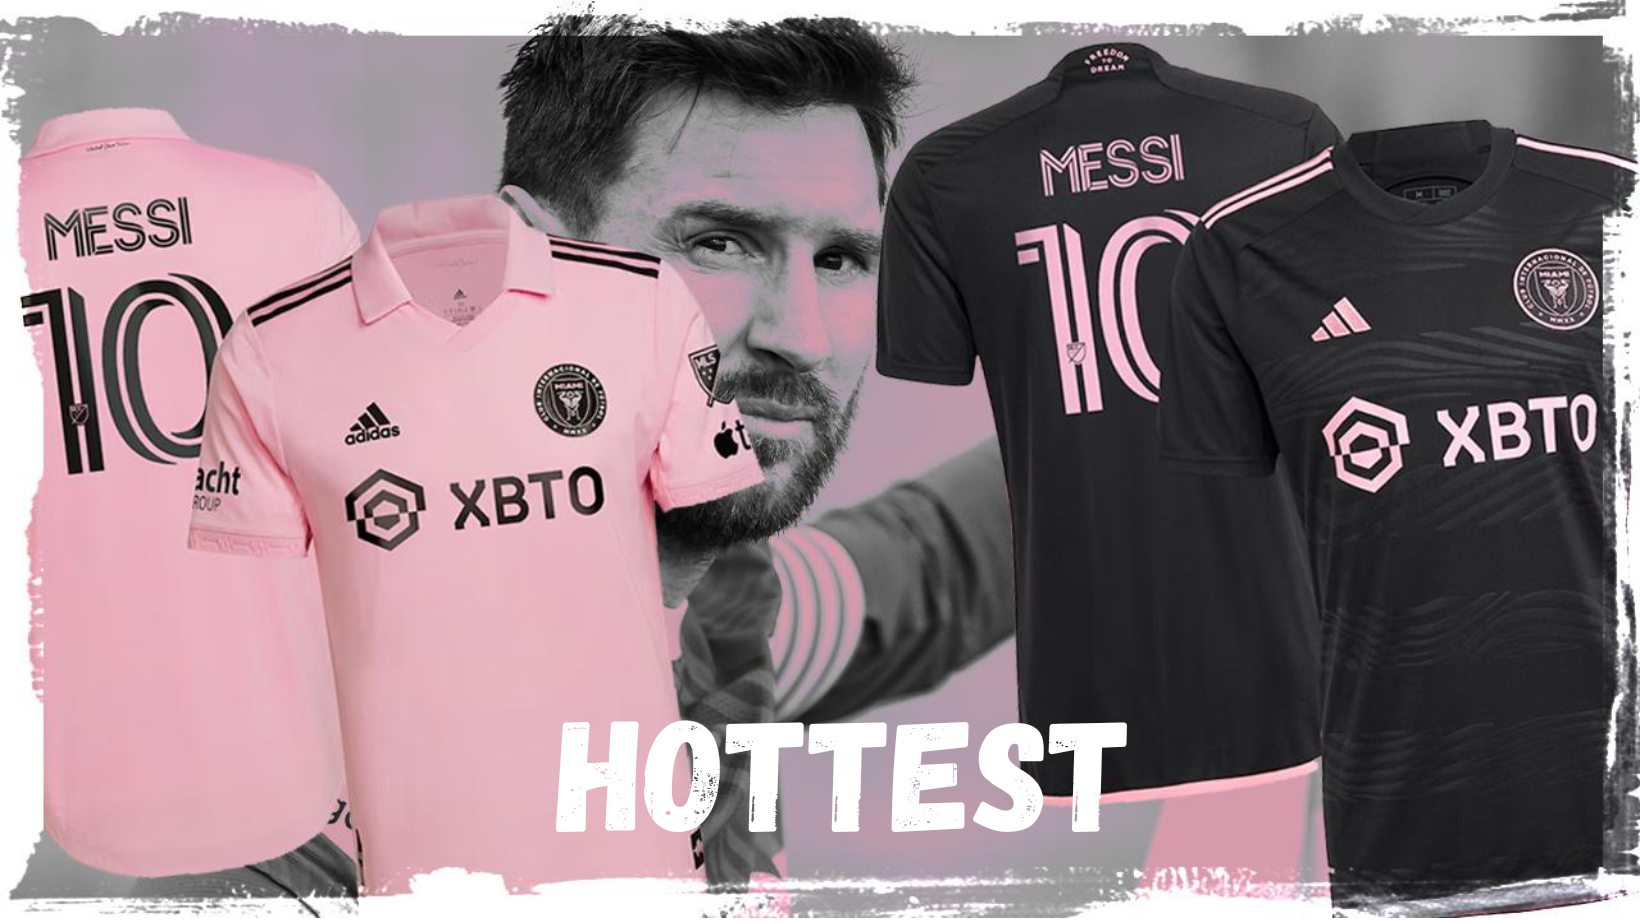 messi-hottest jersey.png